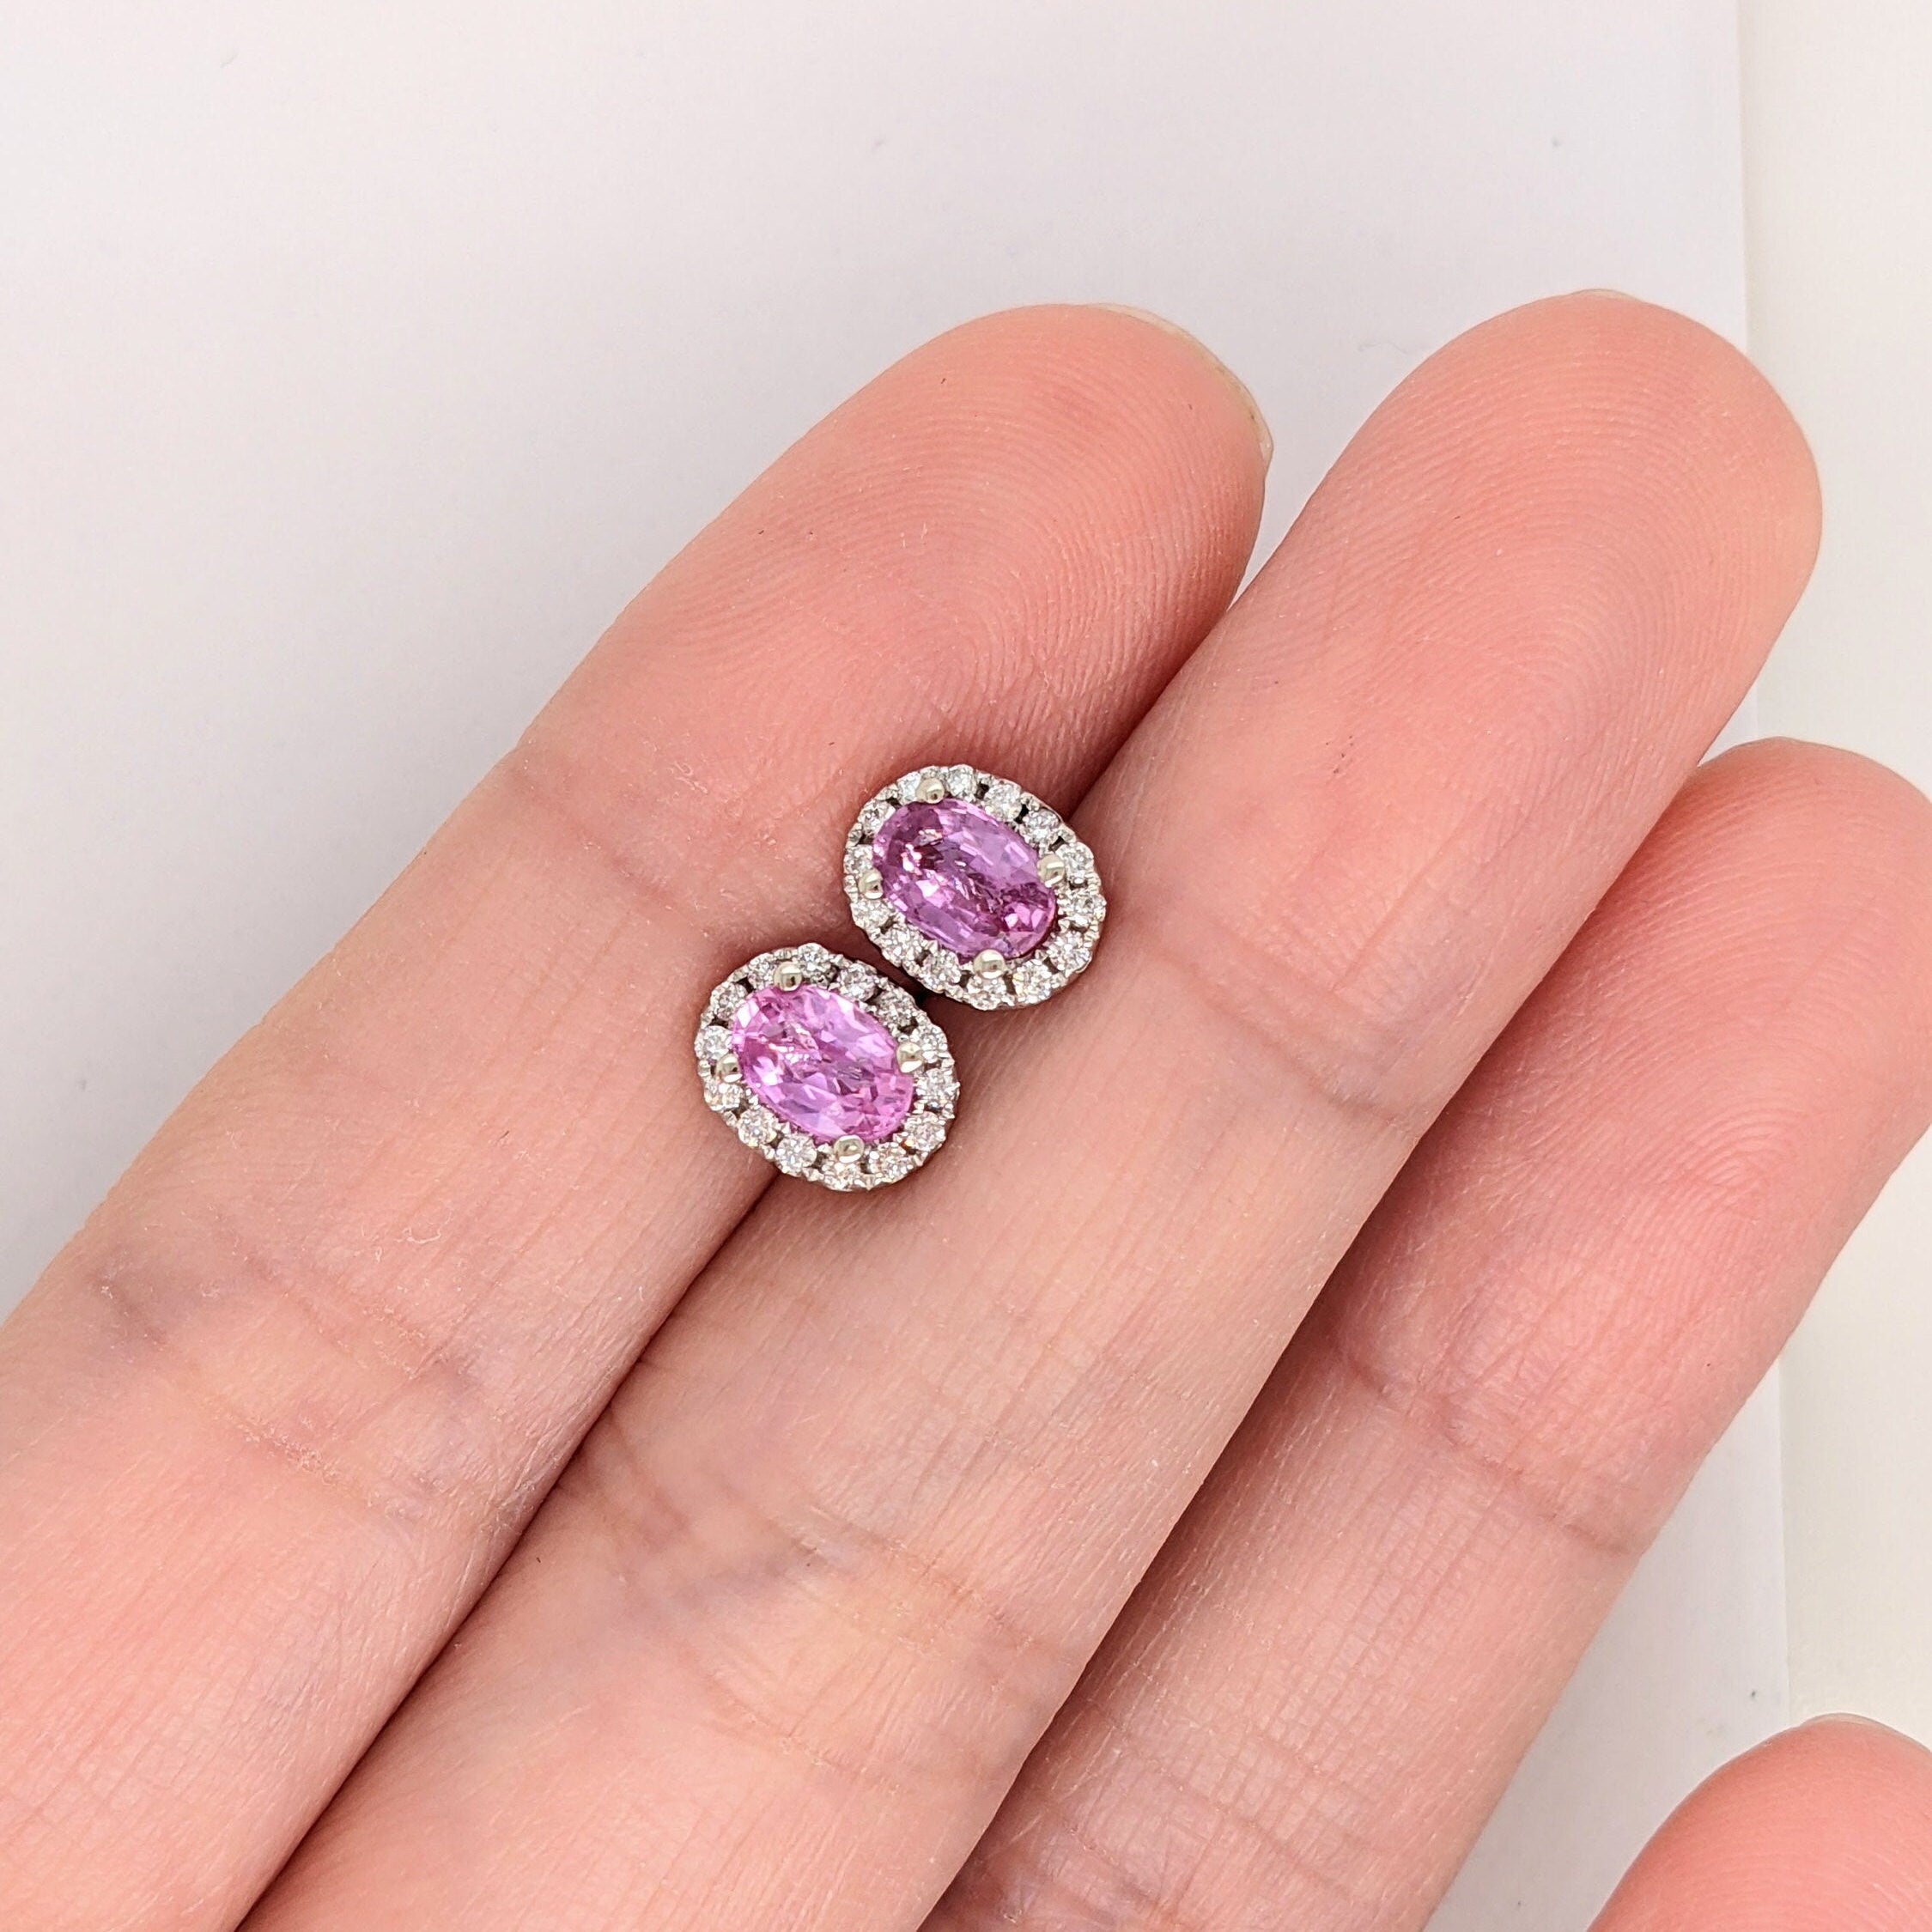 Pink Sapphire and Diamond Earring Studs in Solid 14K White Gold | Oval 6x4mm | Pink Gemstone Studs | Daily Wear | Cute Studs | Ready to Ship